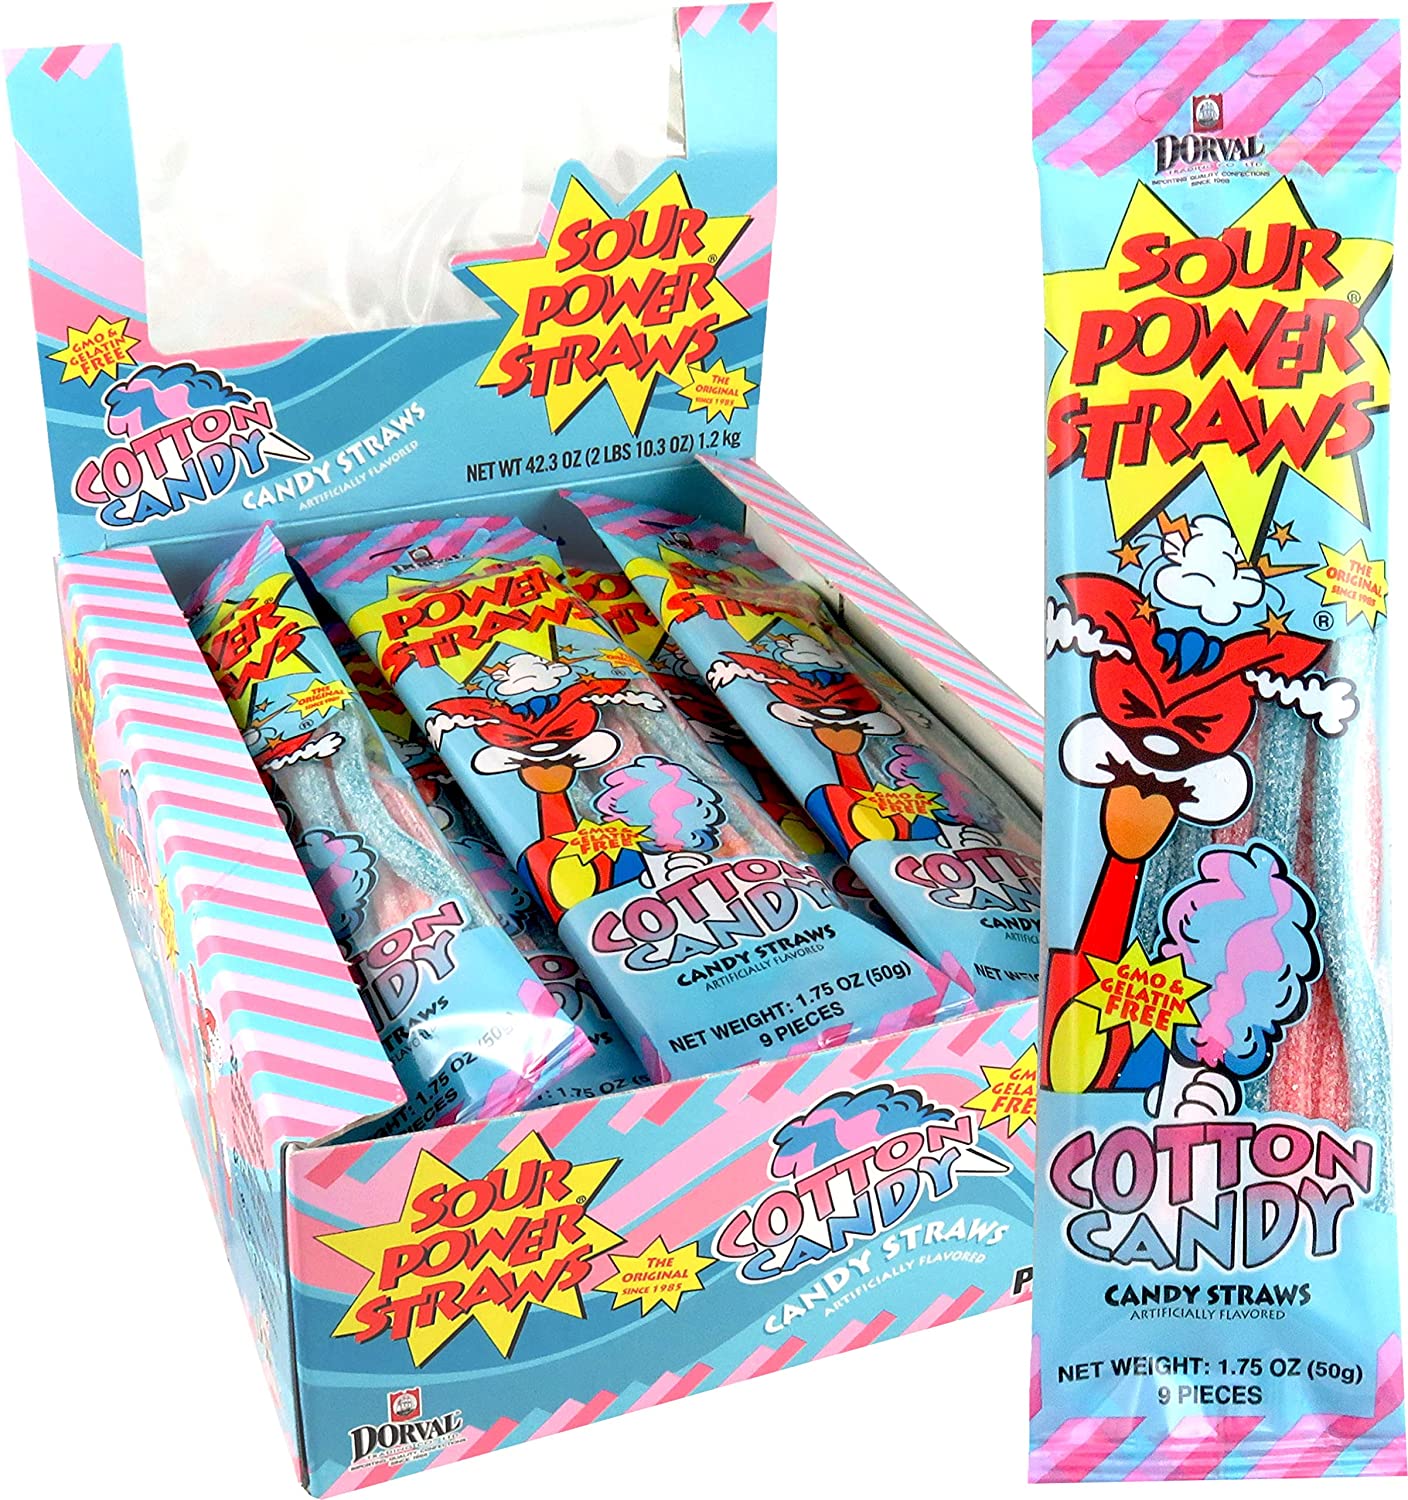 Sour Power Candy Straws Straws Candy 1.75 oz (Pack of 24 Cotton, Candy - 2 lbs